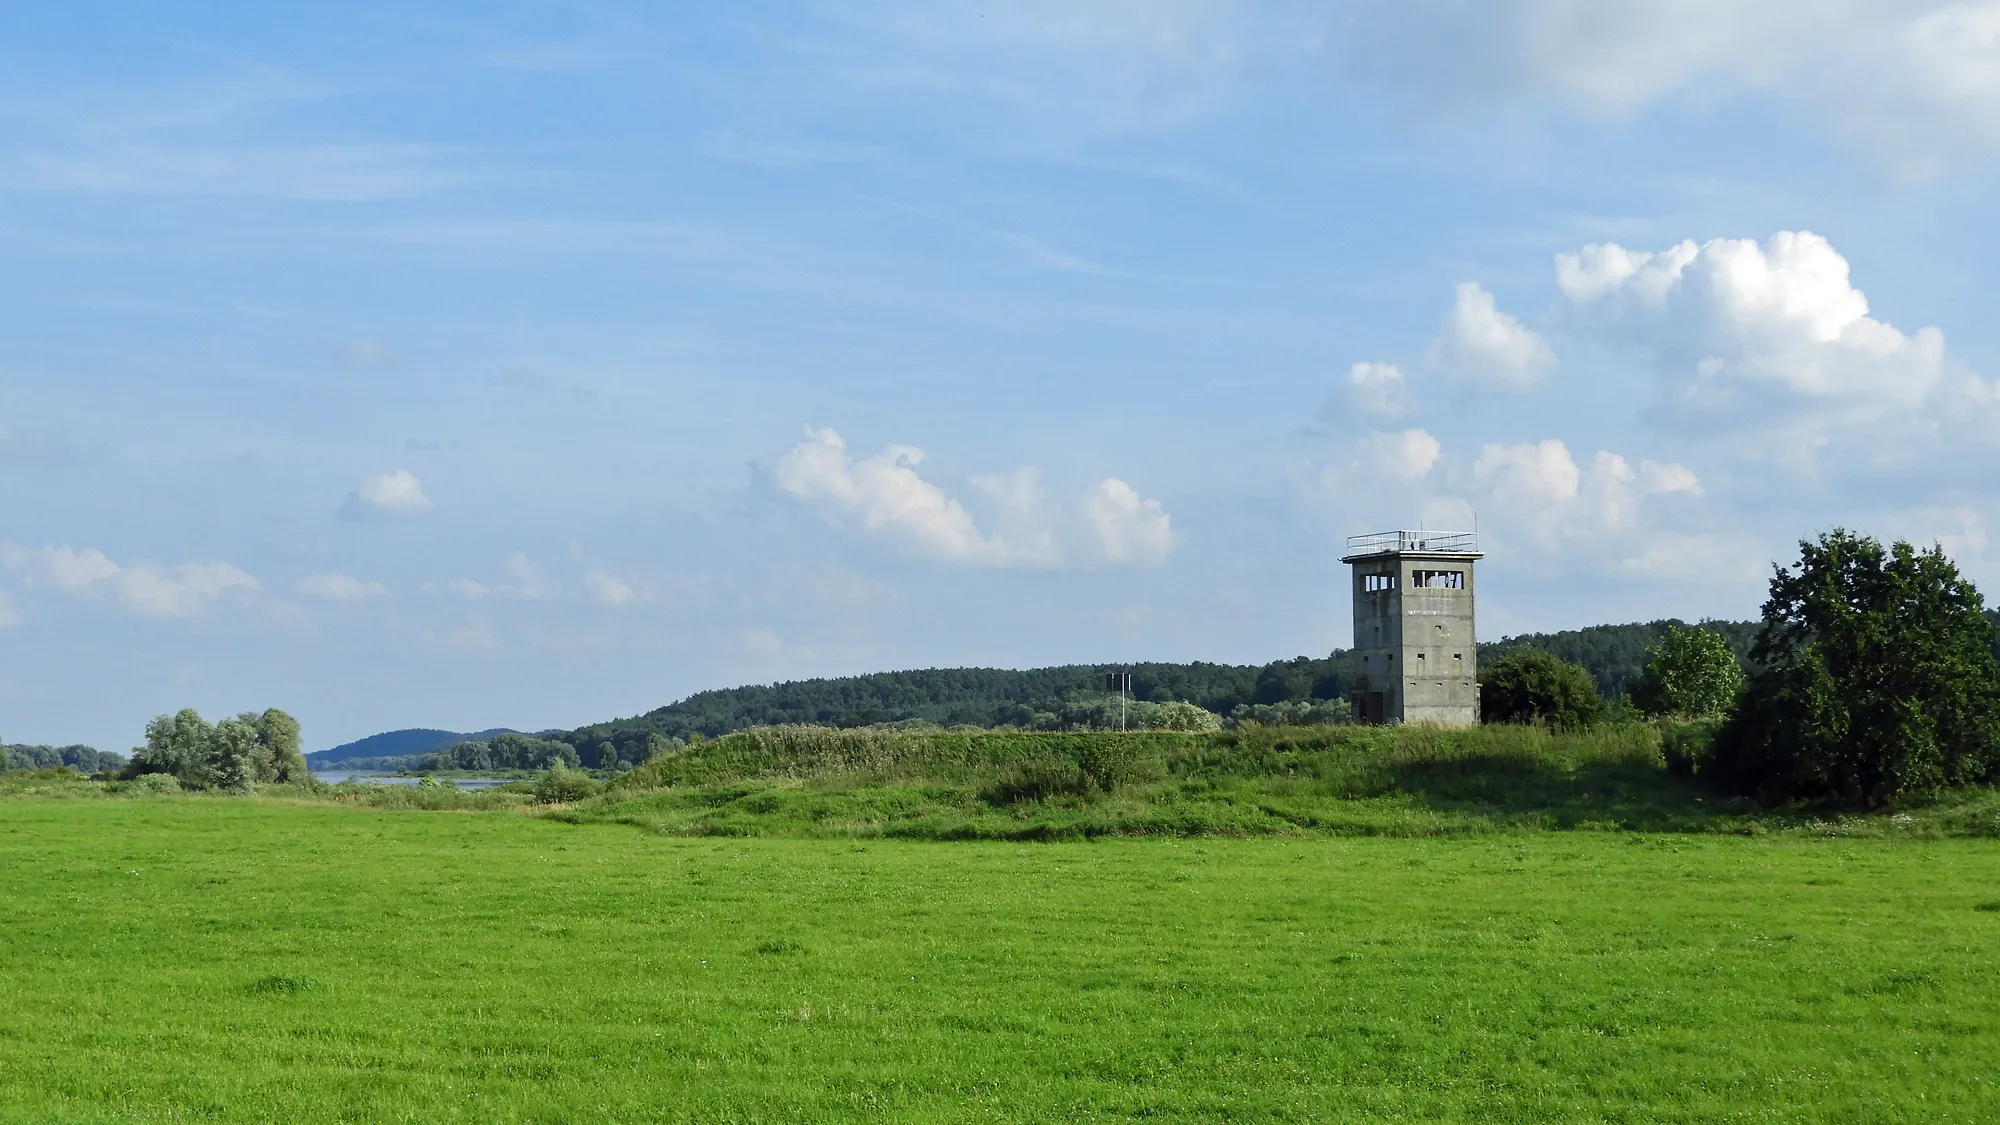 Photo showing: Remnant of a watchtower of the GDR border regime in today's municipality "Amt Neuhaus", southeast of the village Darchau in the dyke foreland of the Elbe river. In the background the wooded, hilly west side of the Elbe (district Lüchow-Dannenberg), in between the Elbe itself. (District Lüneburg, north-eastern Lower Saxony, Germany).